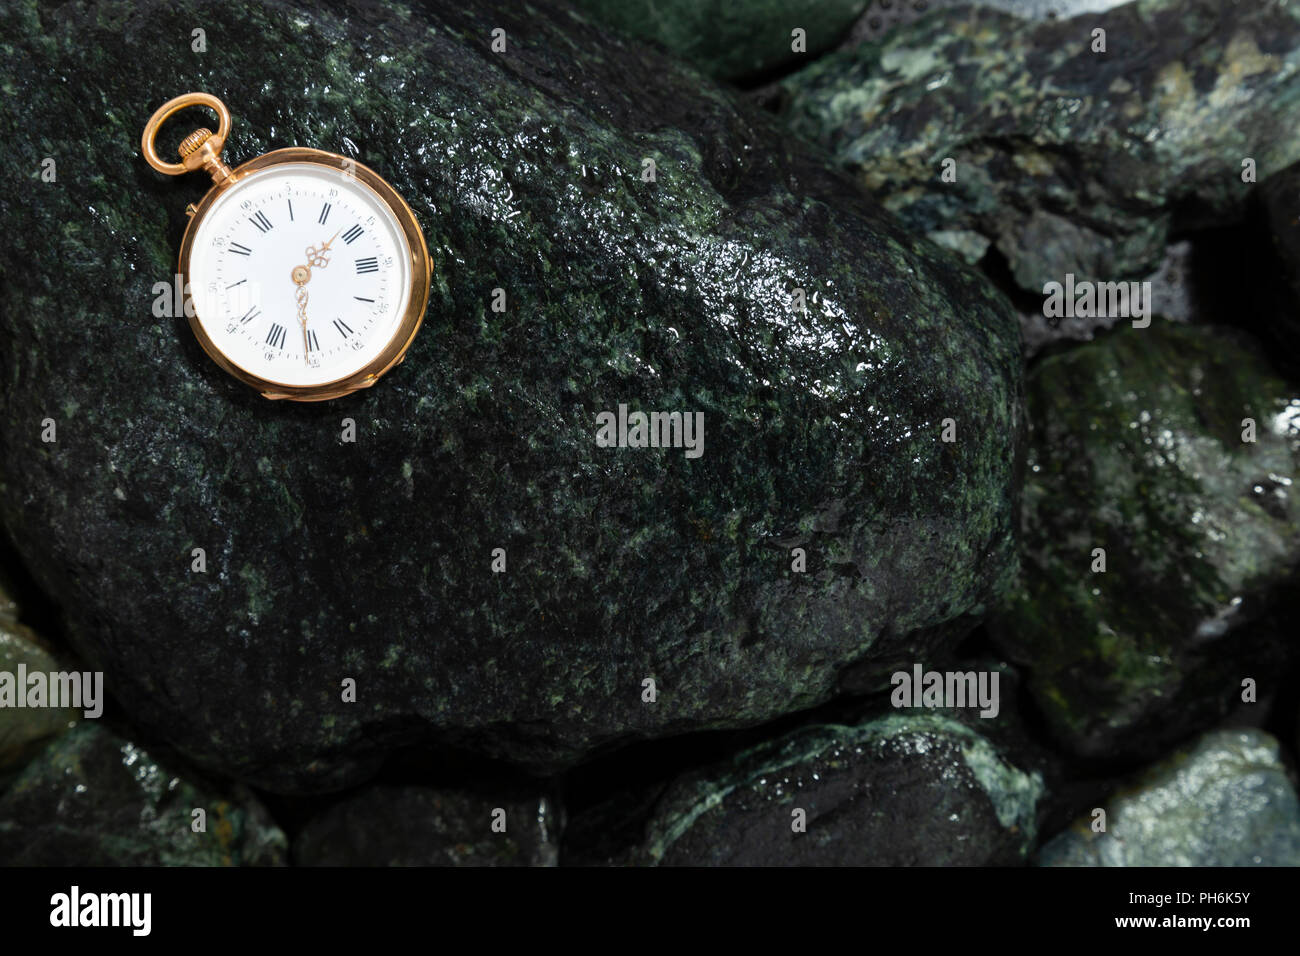 Closeup of a beautiful classic gold pocket watch laying on wet green stones Stock Photo